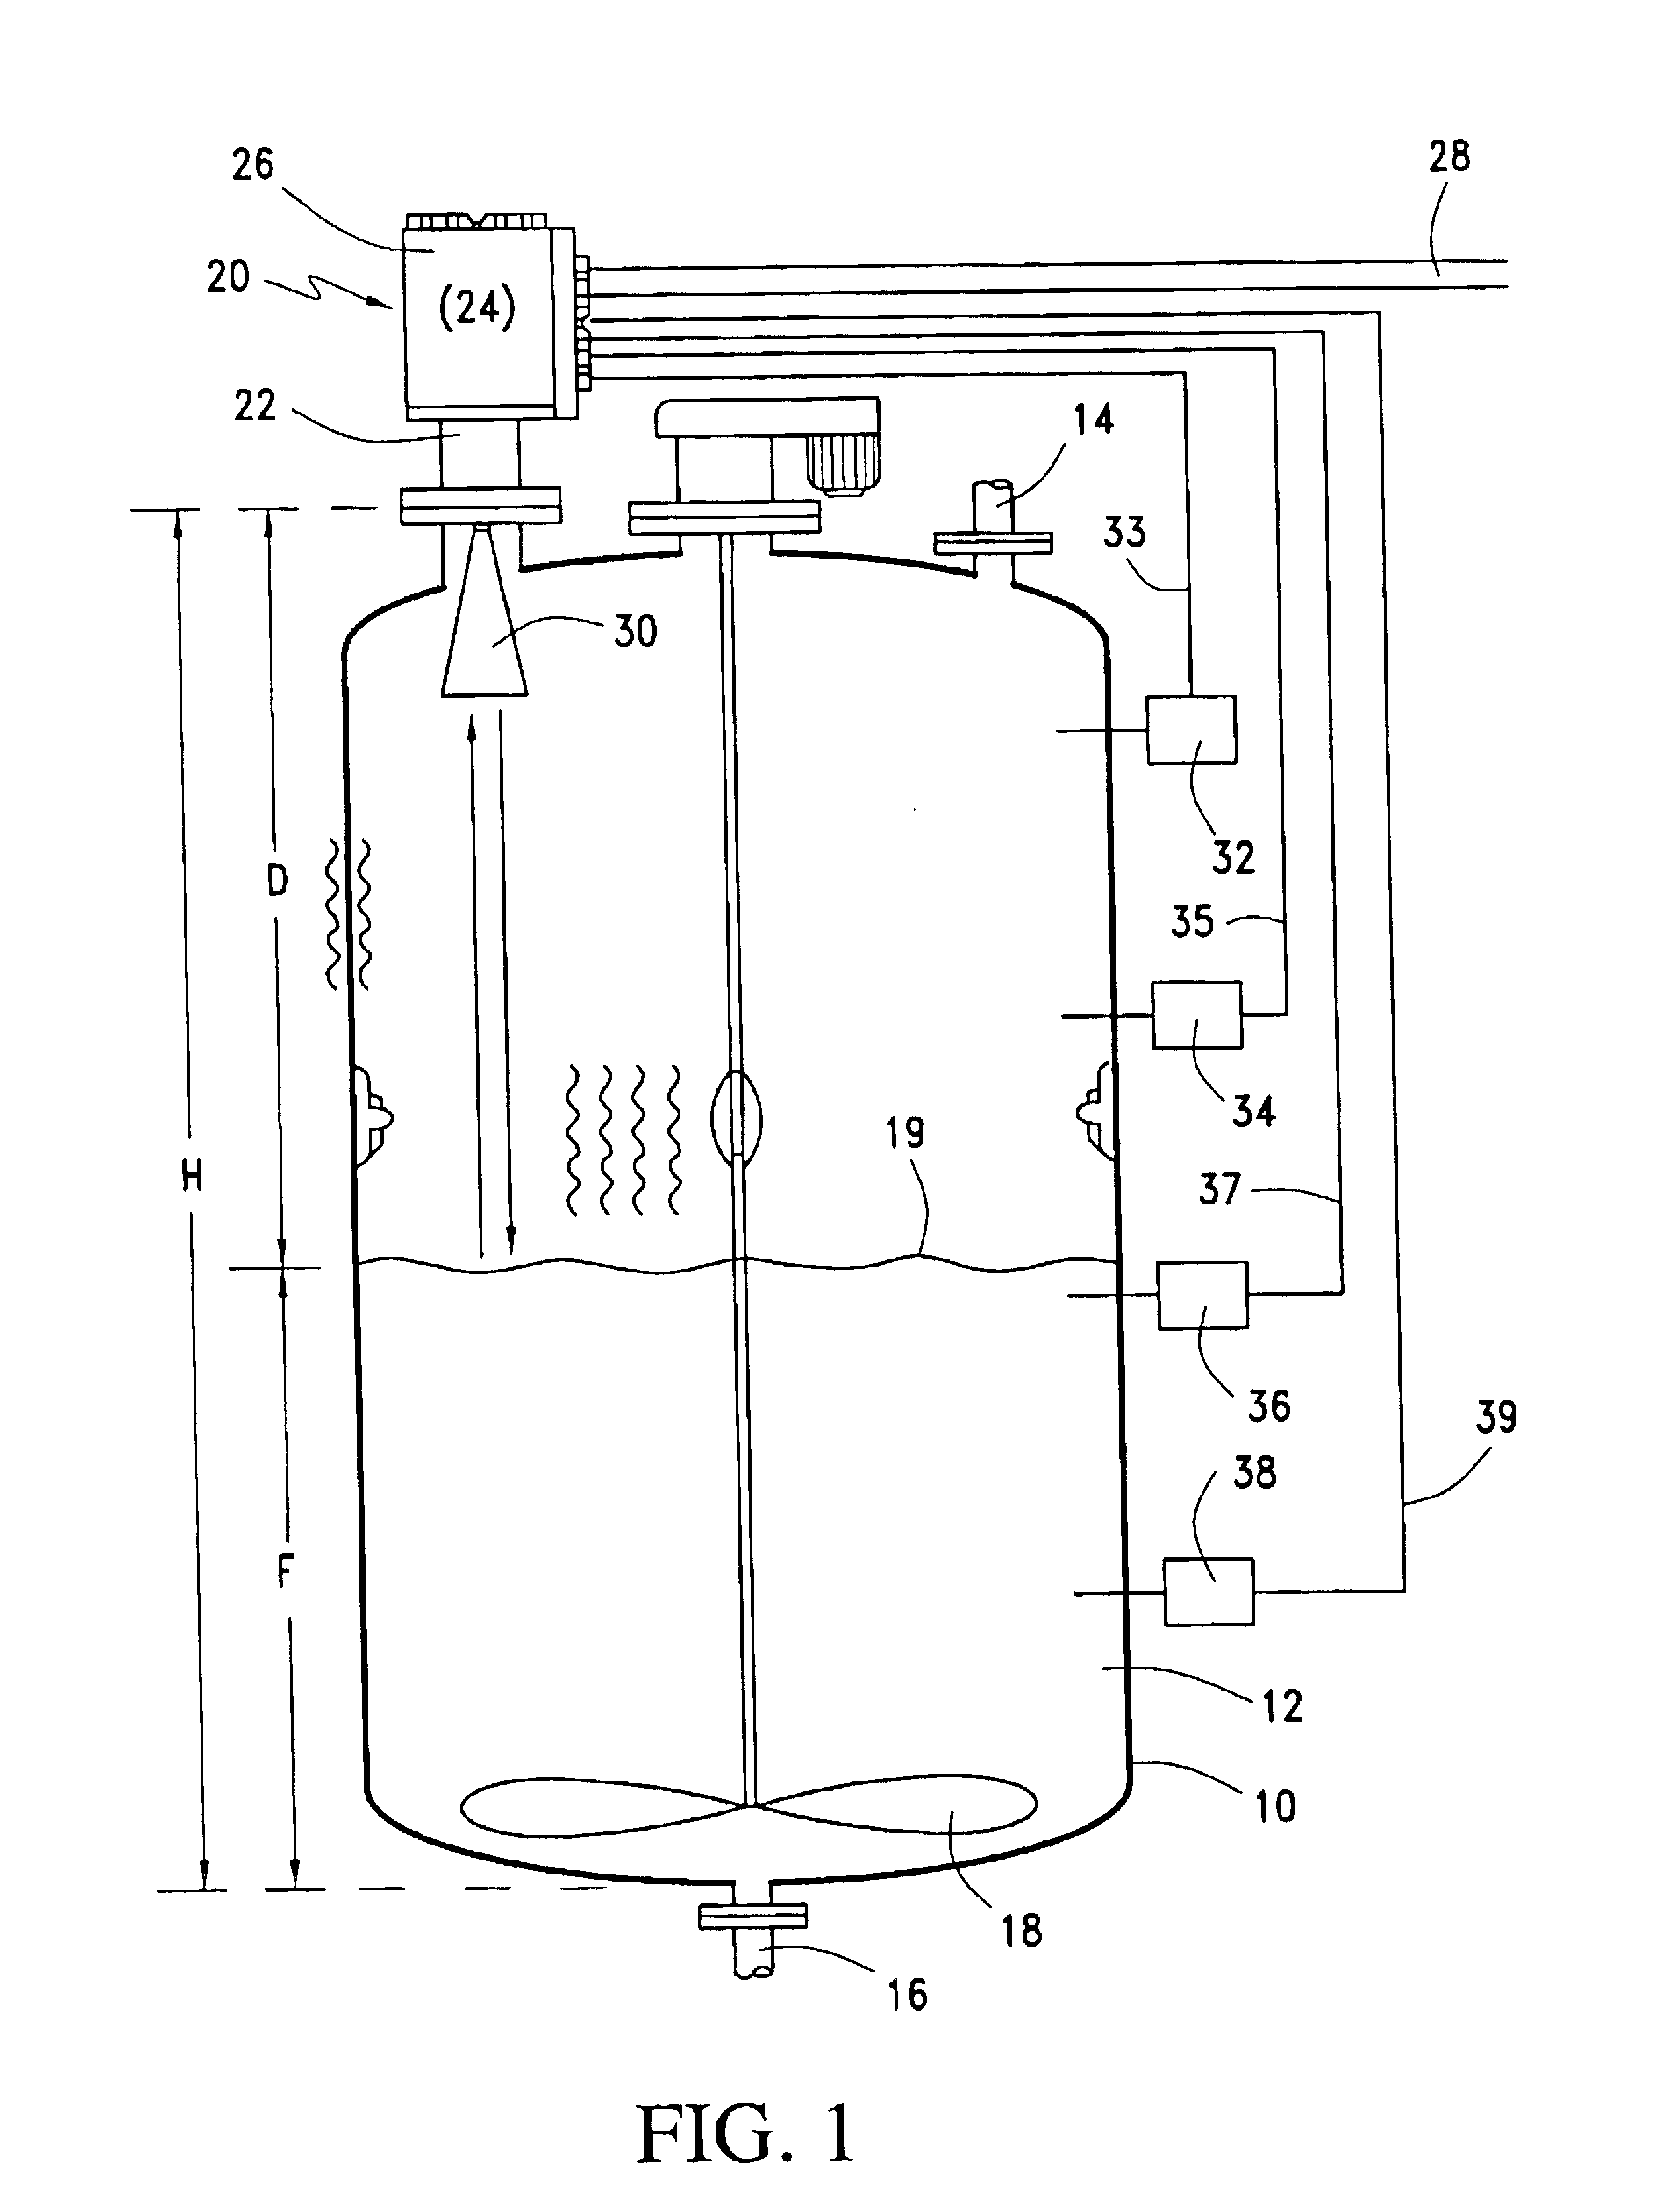 Arrangement for measuring the level of contents in a container